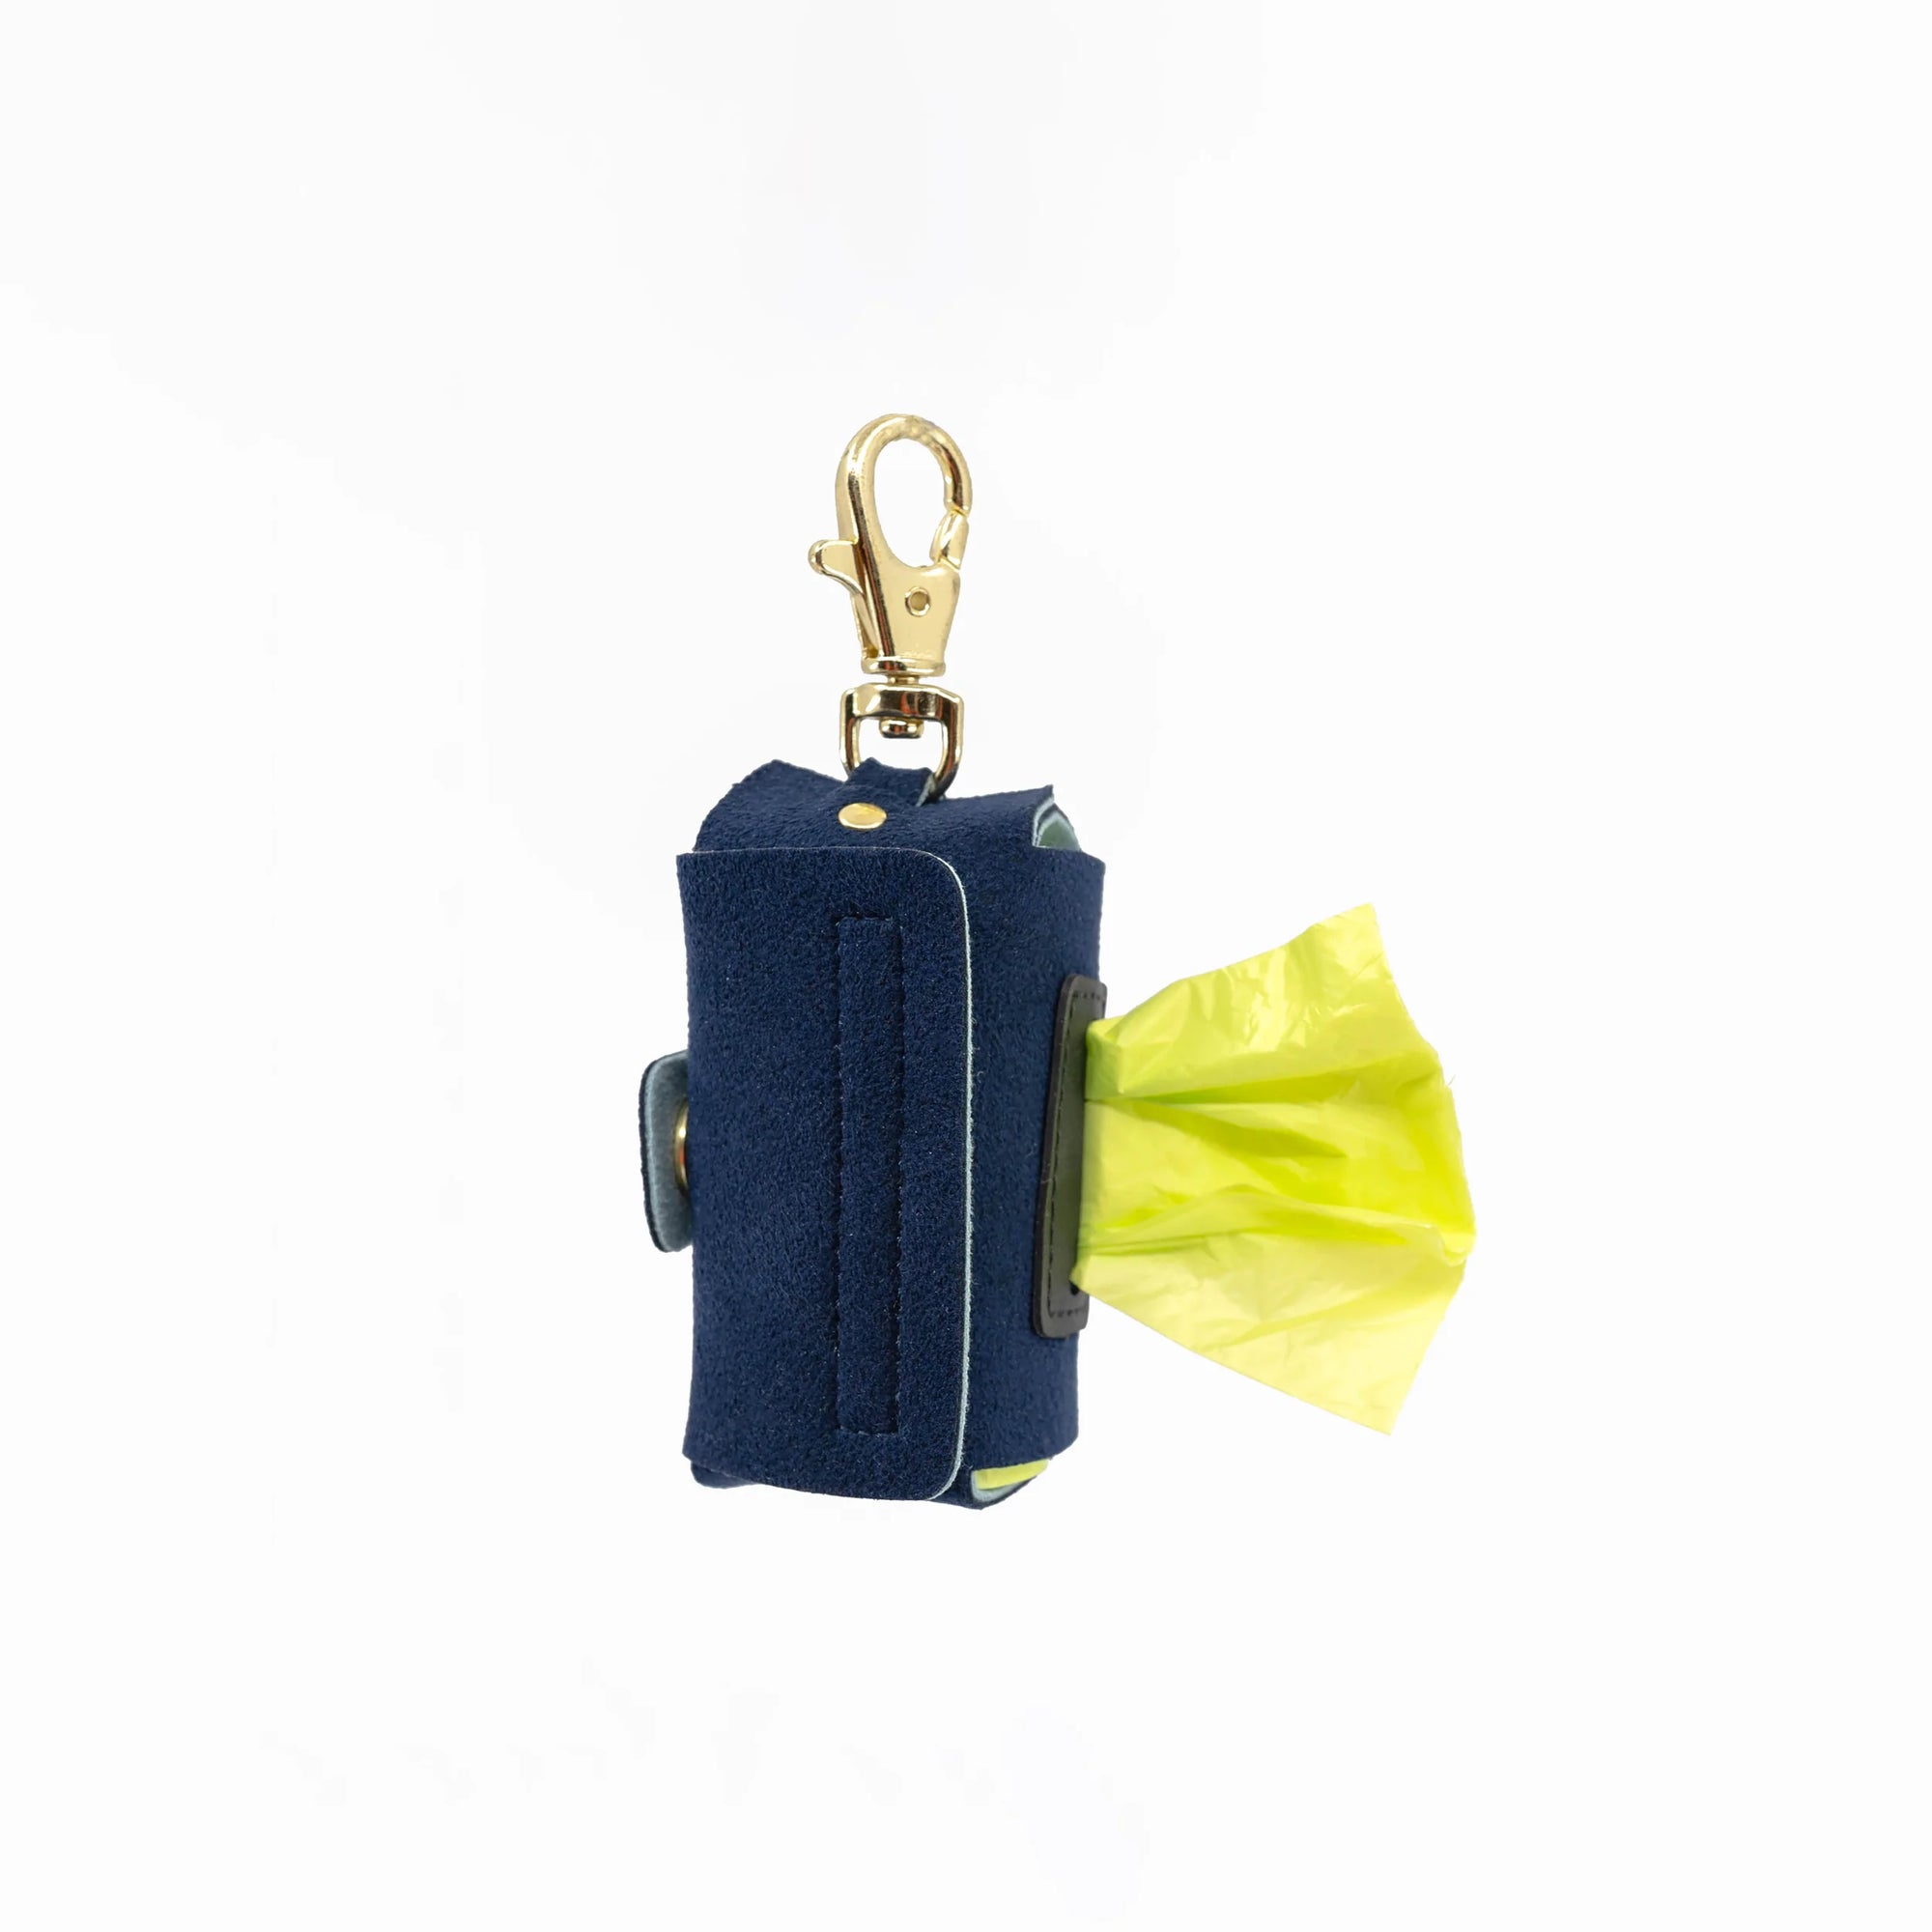 Featured is a navy blue dog poop bag holder with a yellow bag peeking out, complete with a gold clip for easy attachment. The item is part of "the furryfolks" product line, designed for practical pet care use.